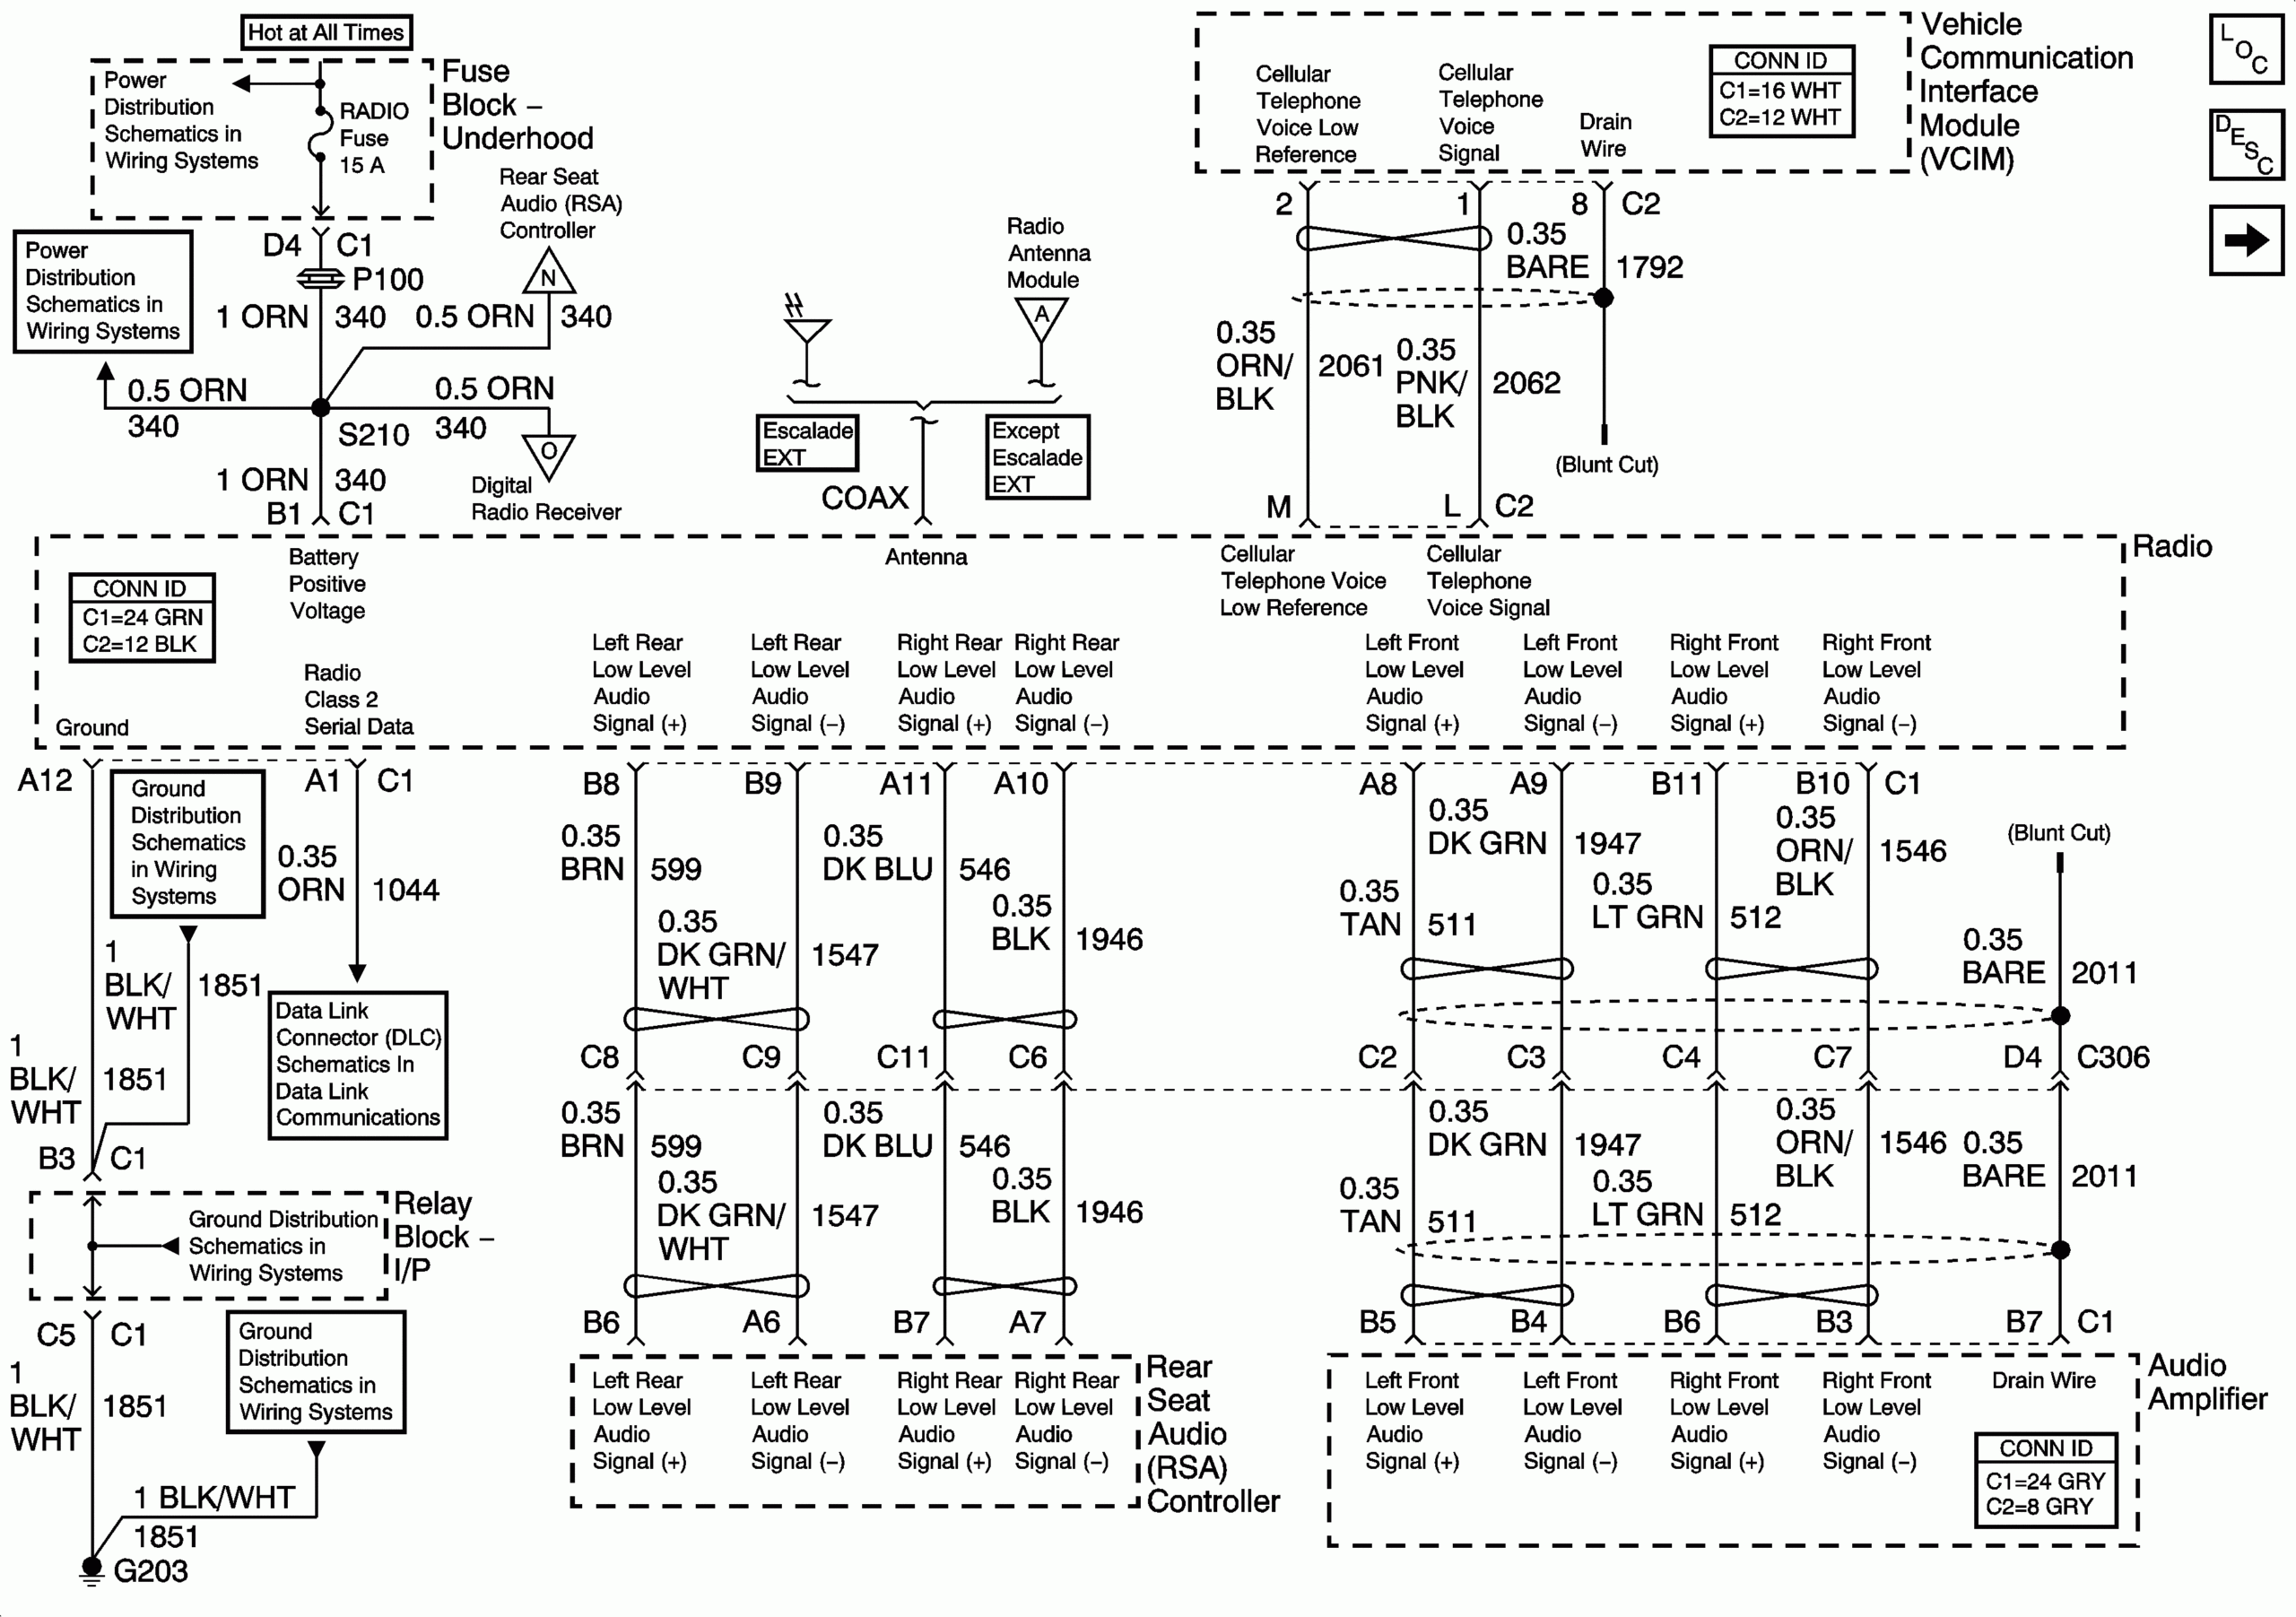 I Am Trying To Get Wiring Diagrams For AC And Radio Of 2003 Chevy Tahoe